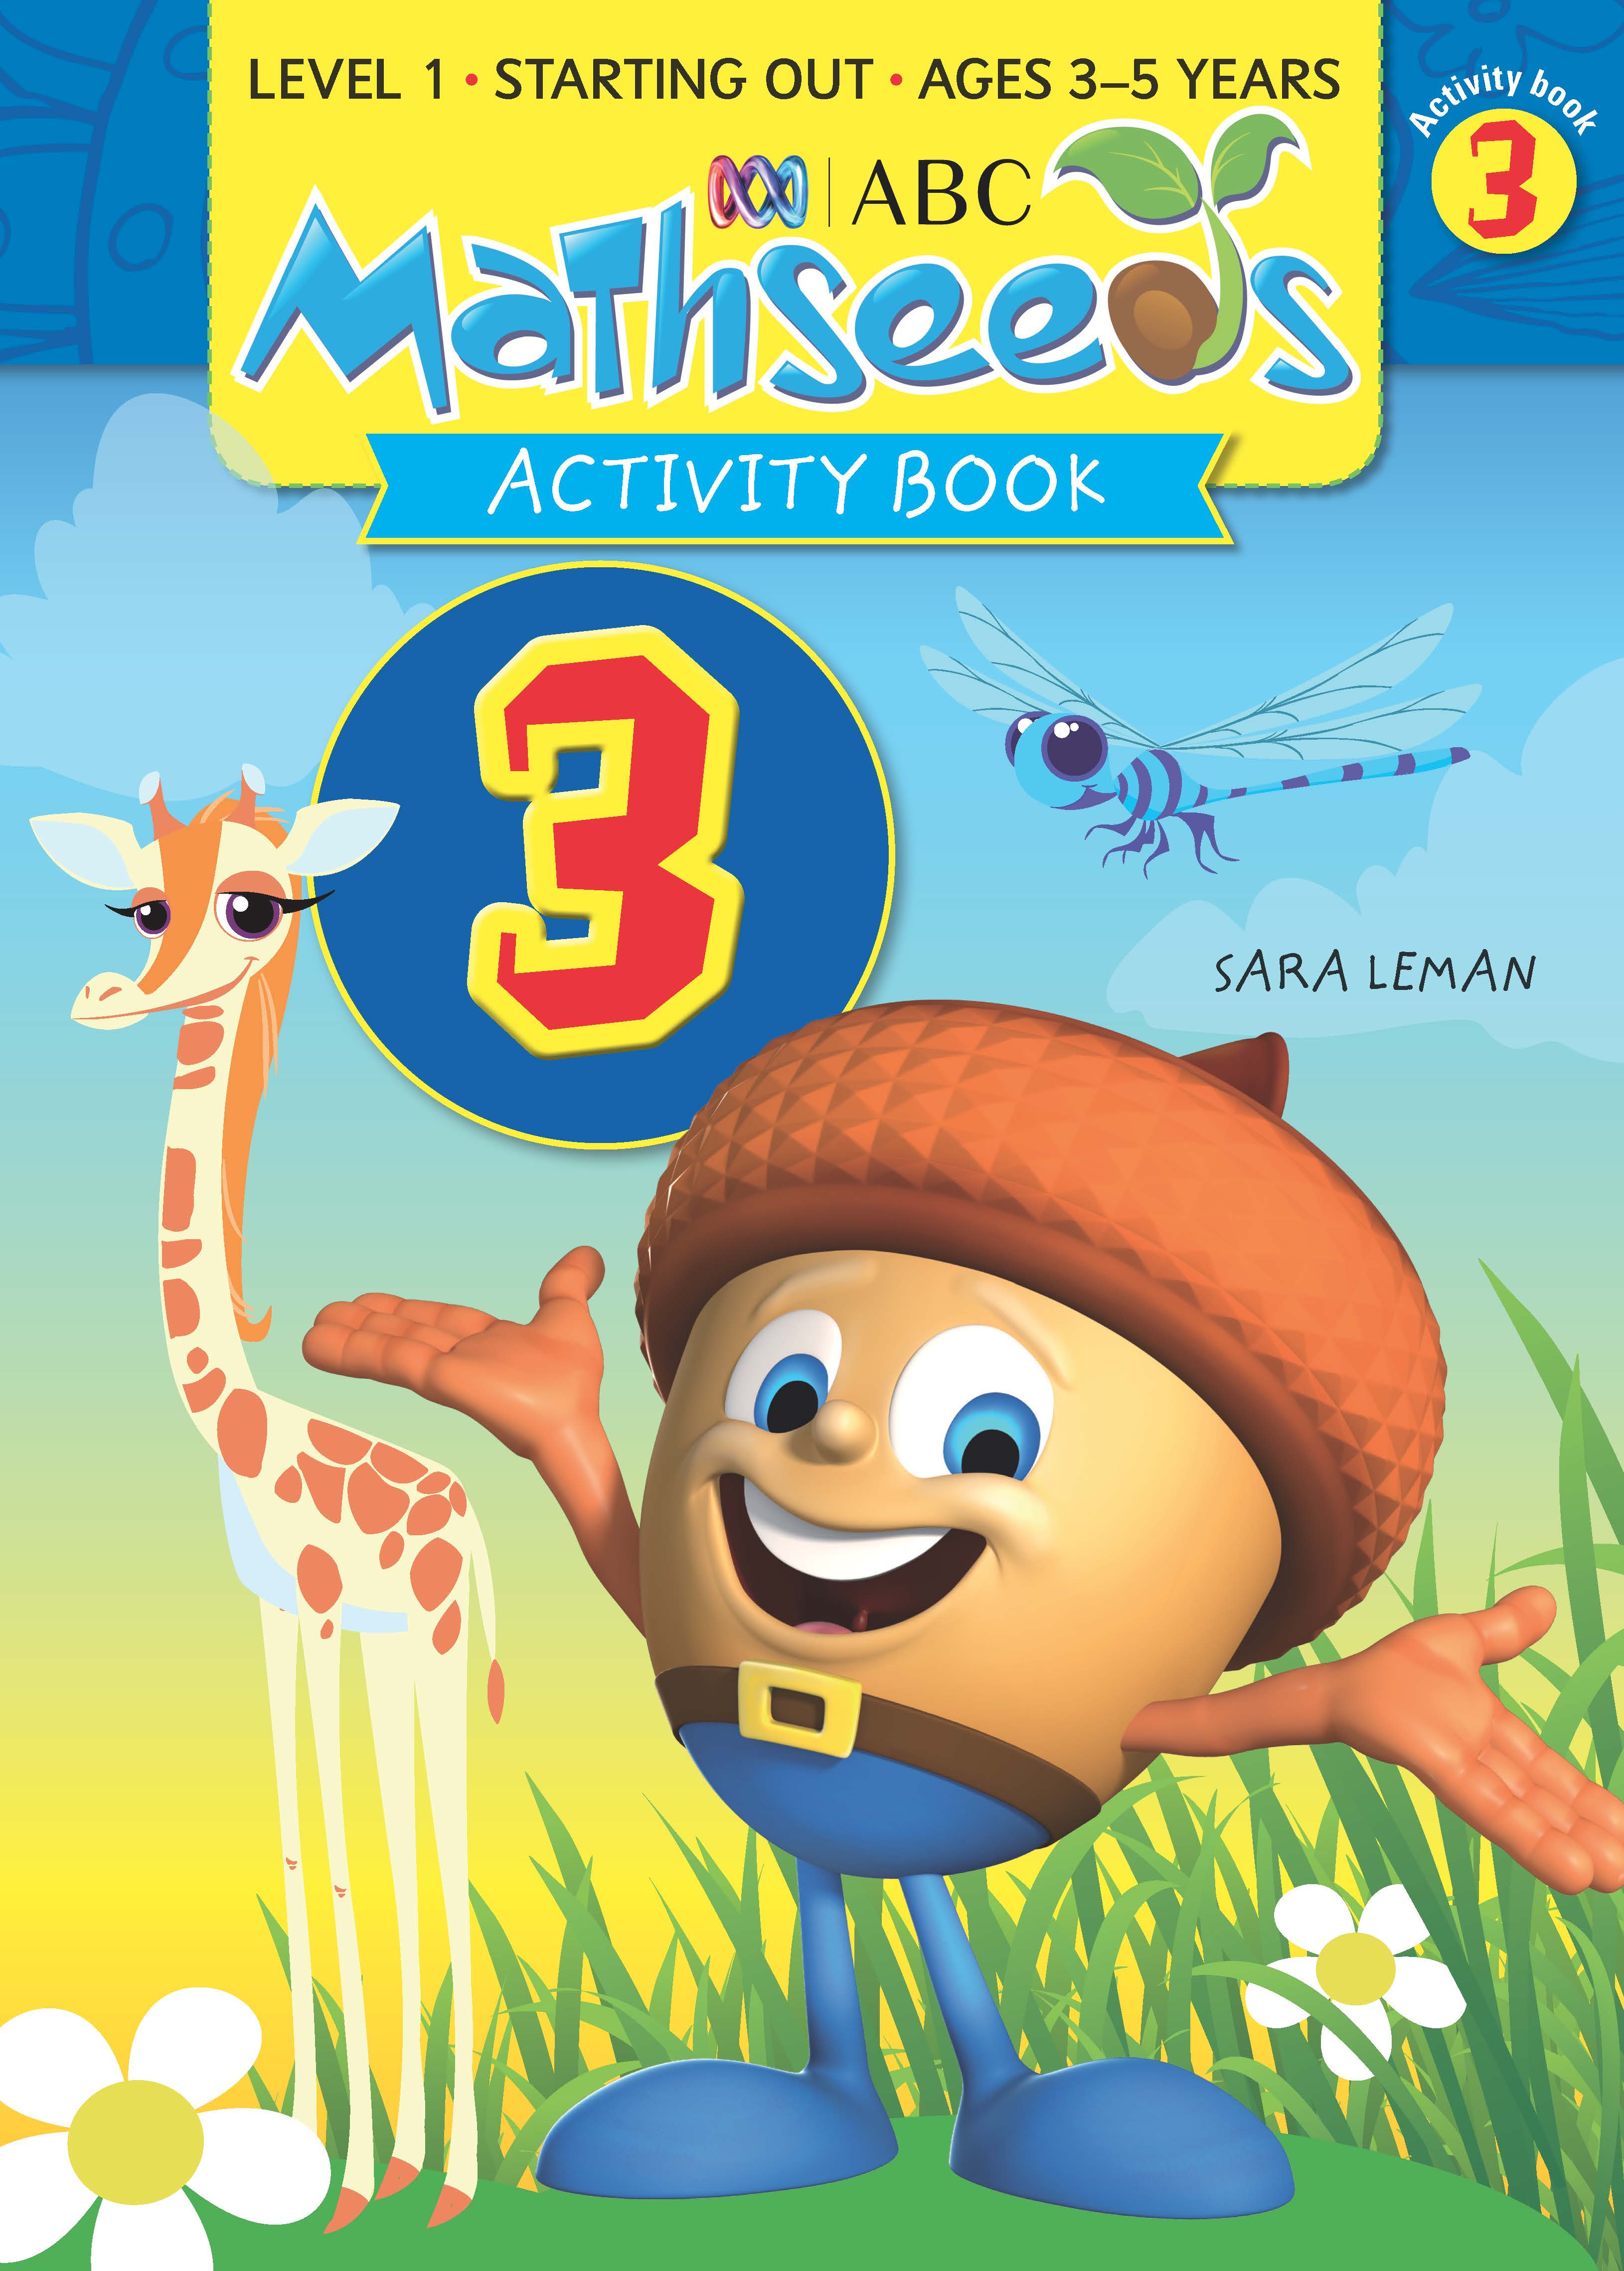 Picture of ABC Mathseeds Activity Book 3 Level 1 Ages 3-5